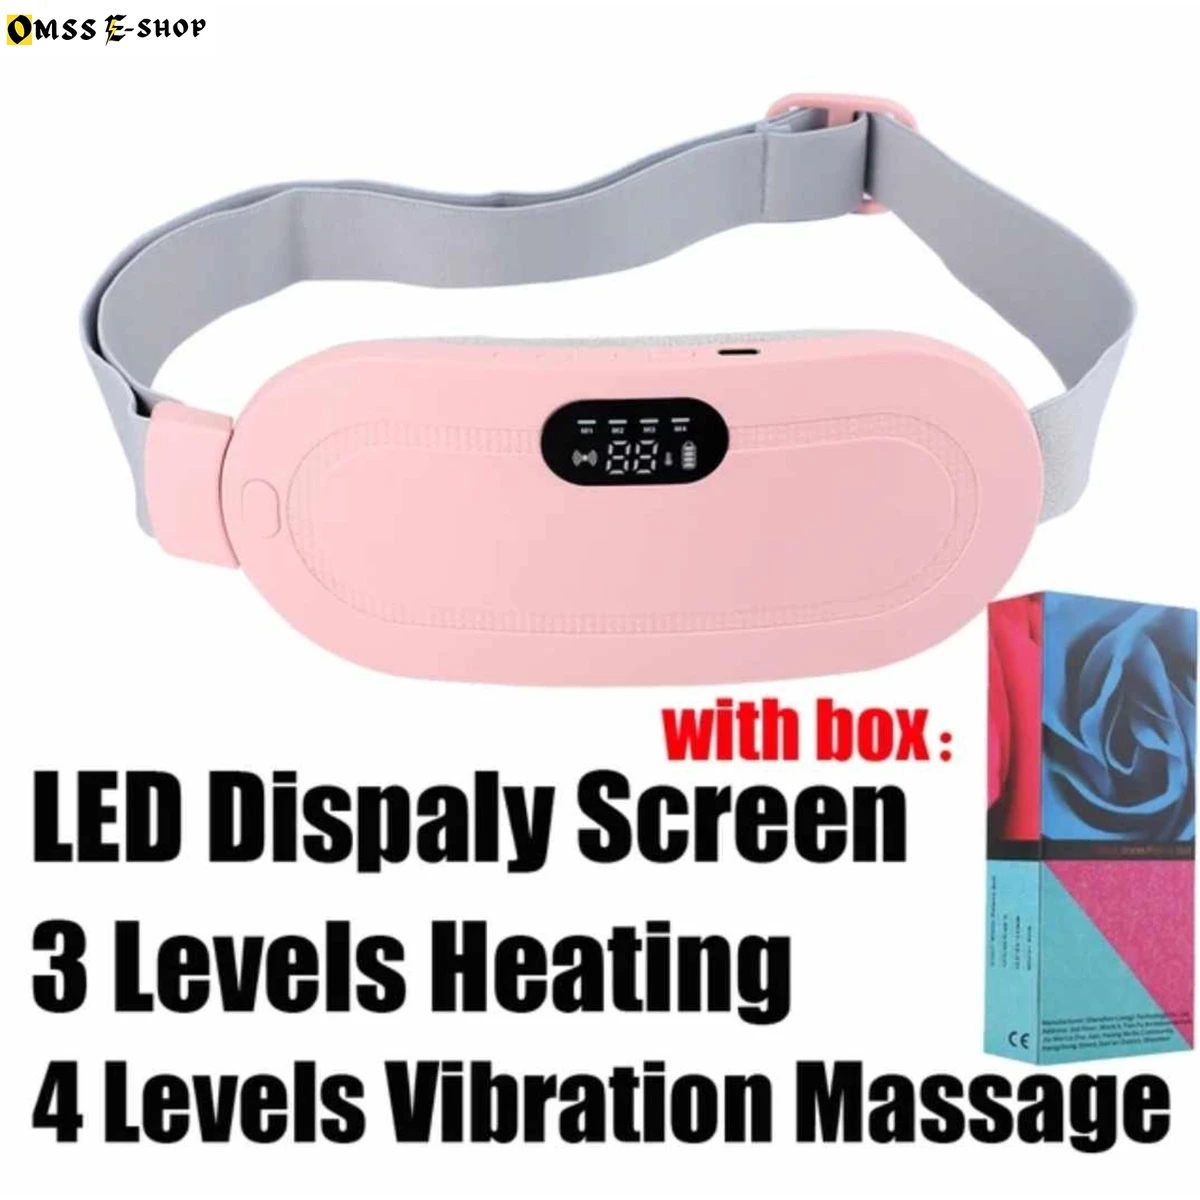 Smart Warm Palace Belt - Heating Pad for Menstrual Cramps- Portable, Rechargeable & Cordless Heating pad for Menstrual Pain or Back pain- Back or Belly Warm belt for Women RP-890DH-RE